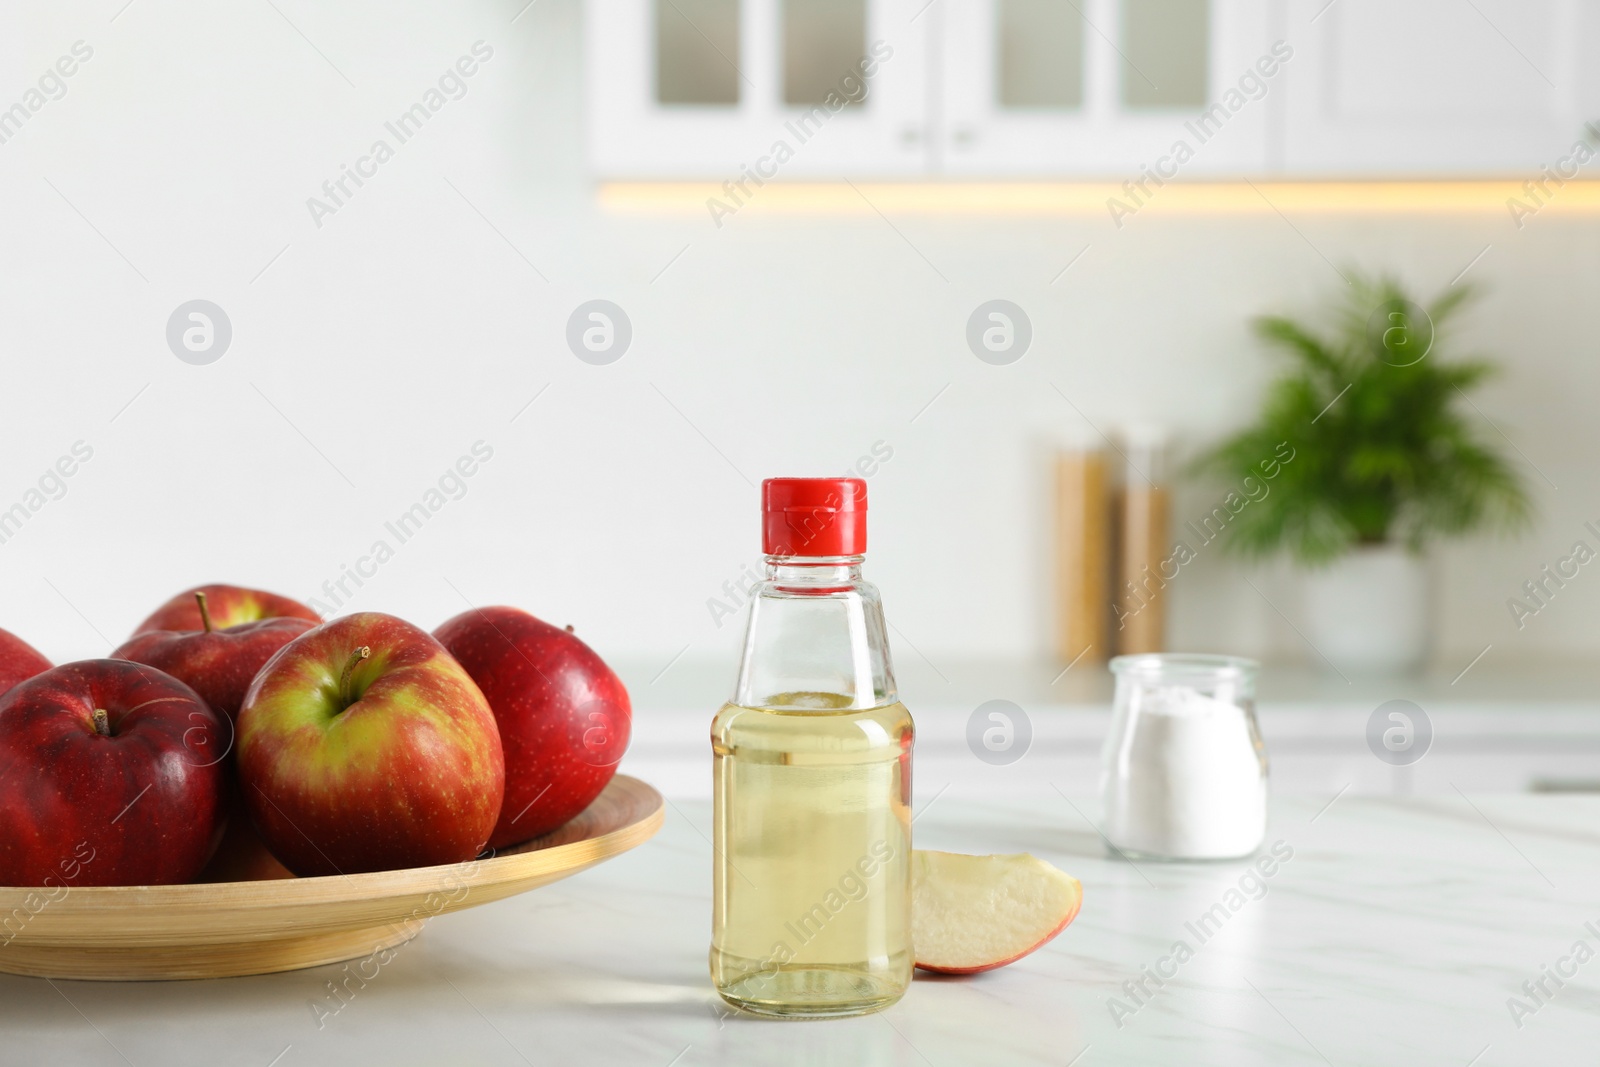 Photo of Apple vinegar and baking soda on white marble table in kitchen. Eco friendly natural detergents